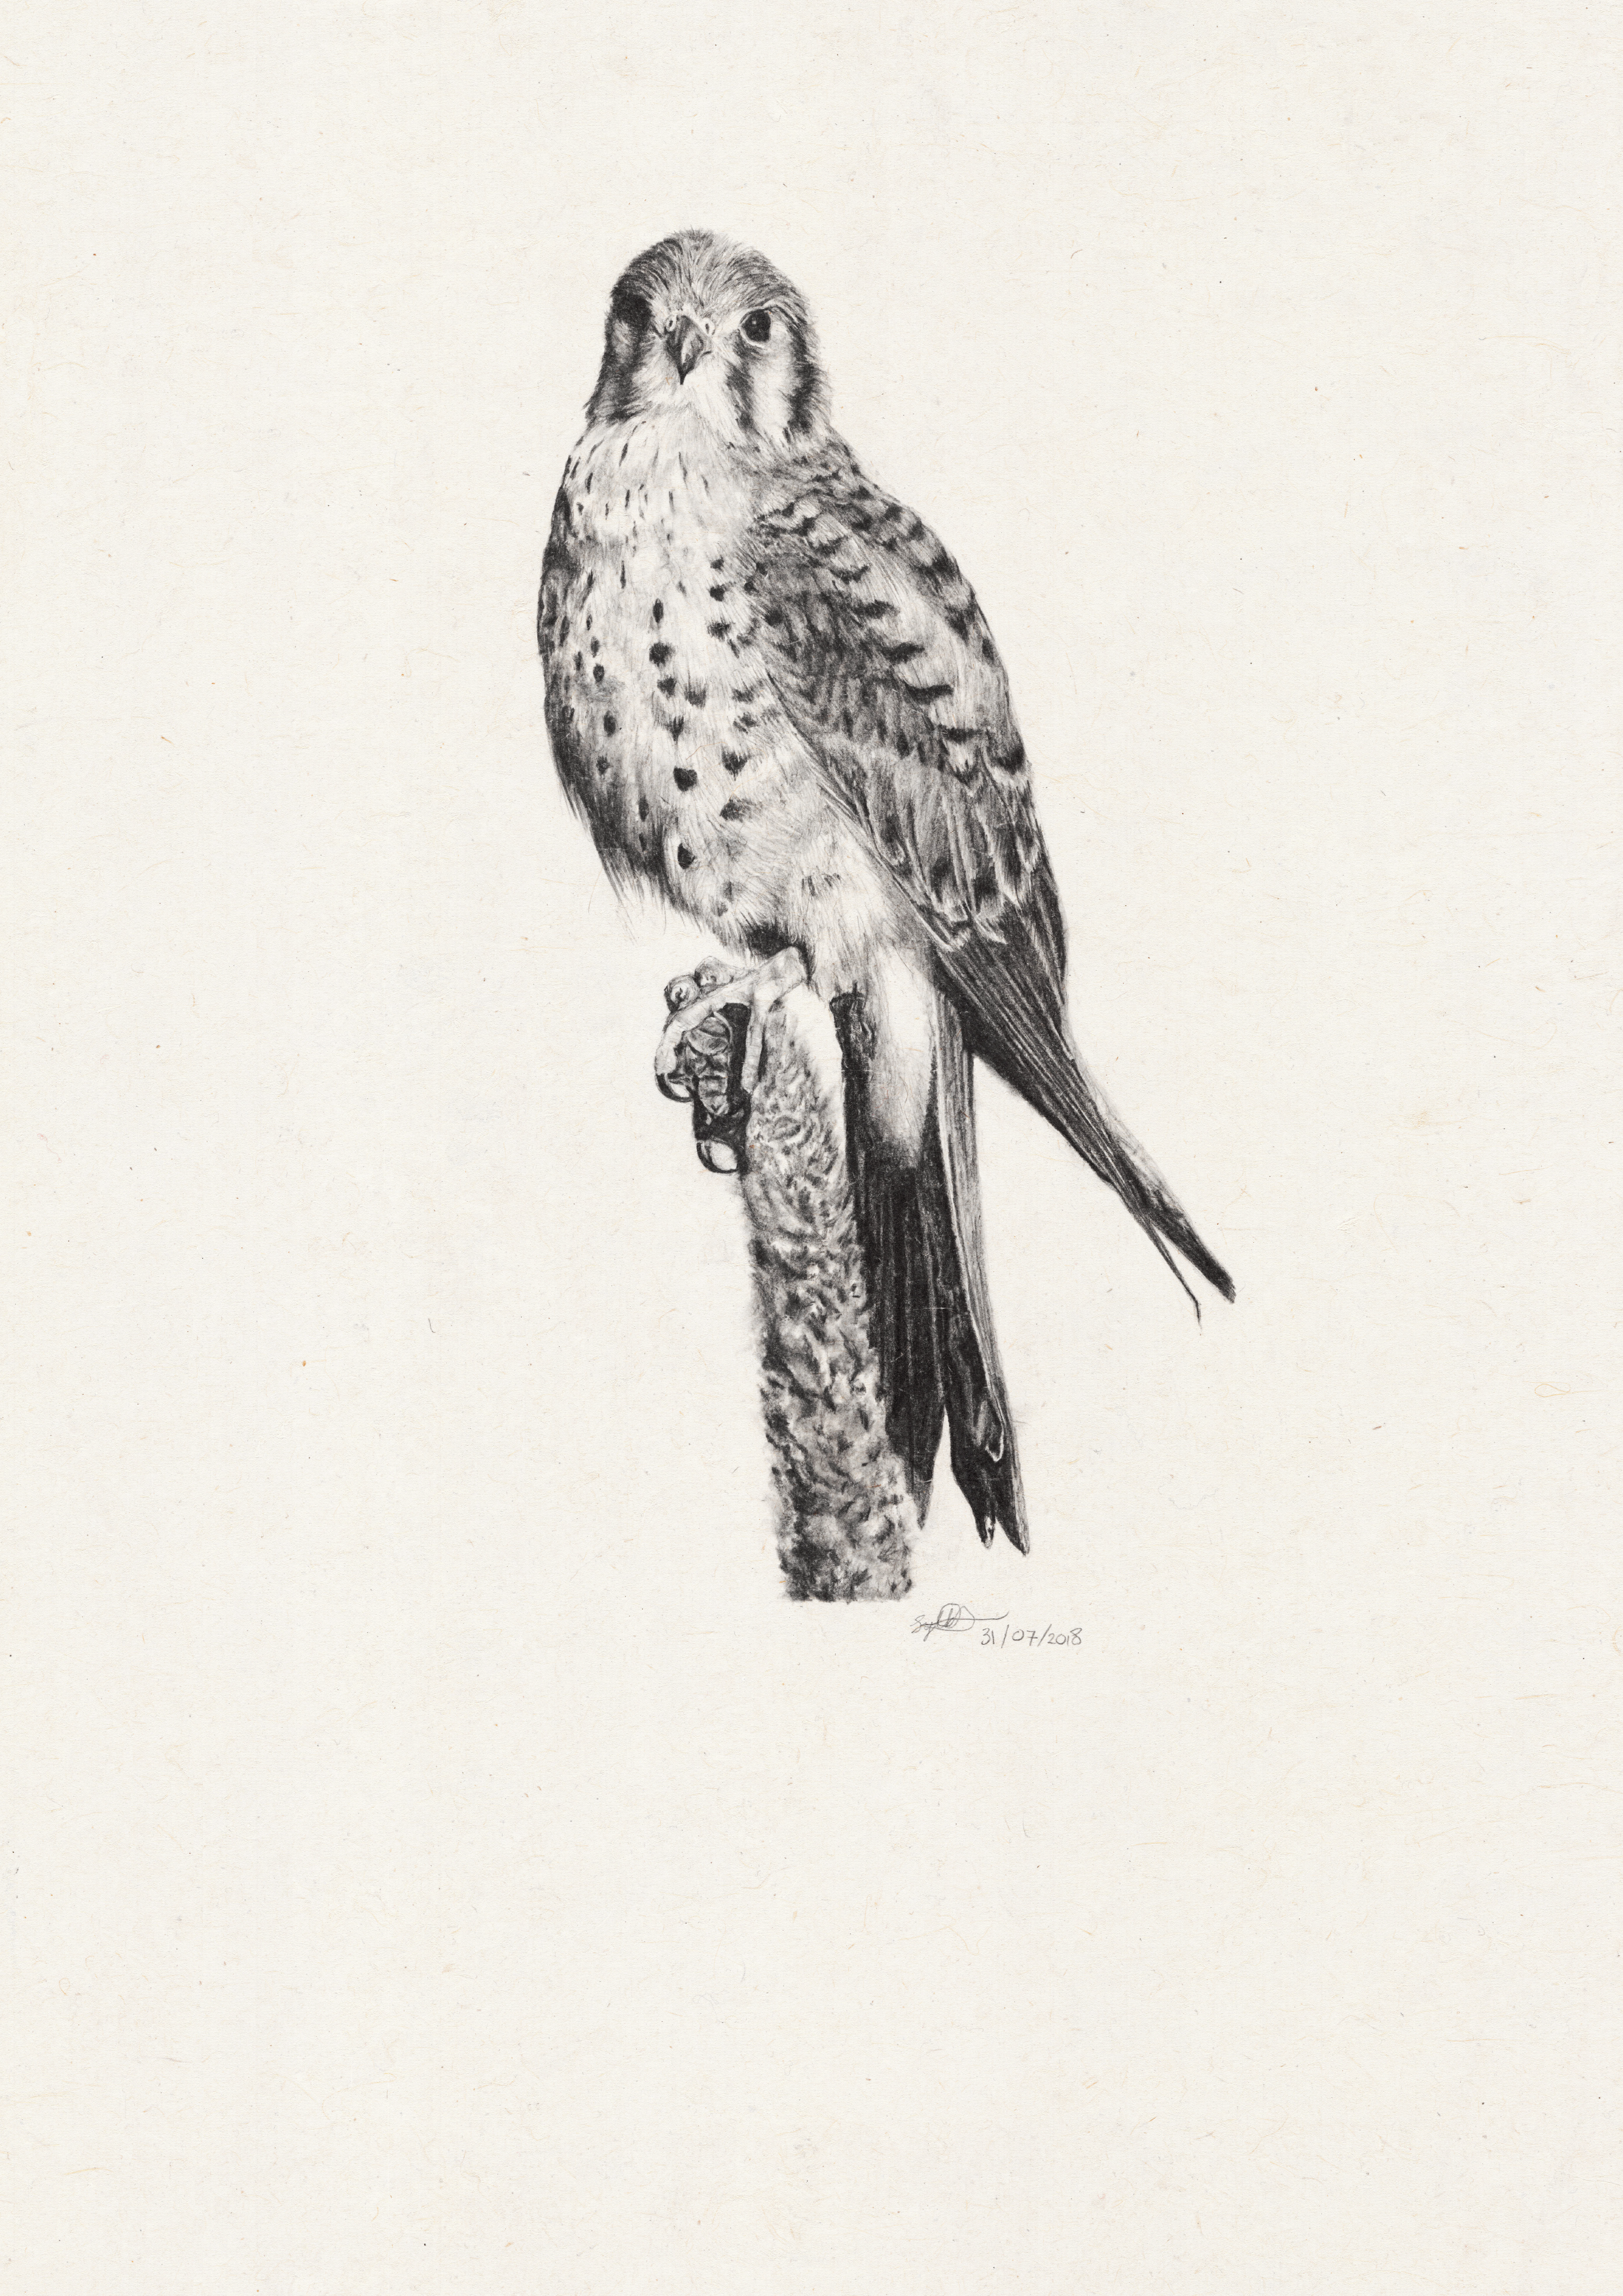 "Vibrant Hand-drawn Illustration of an American Kestrel Falcon | Colorful Bird of Prey with Distinctive Plumage"